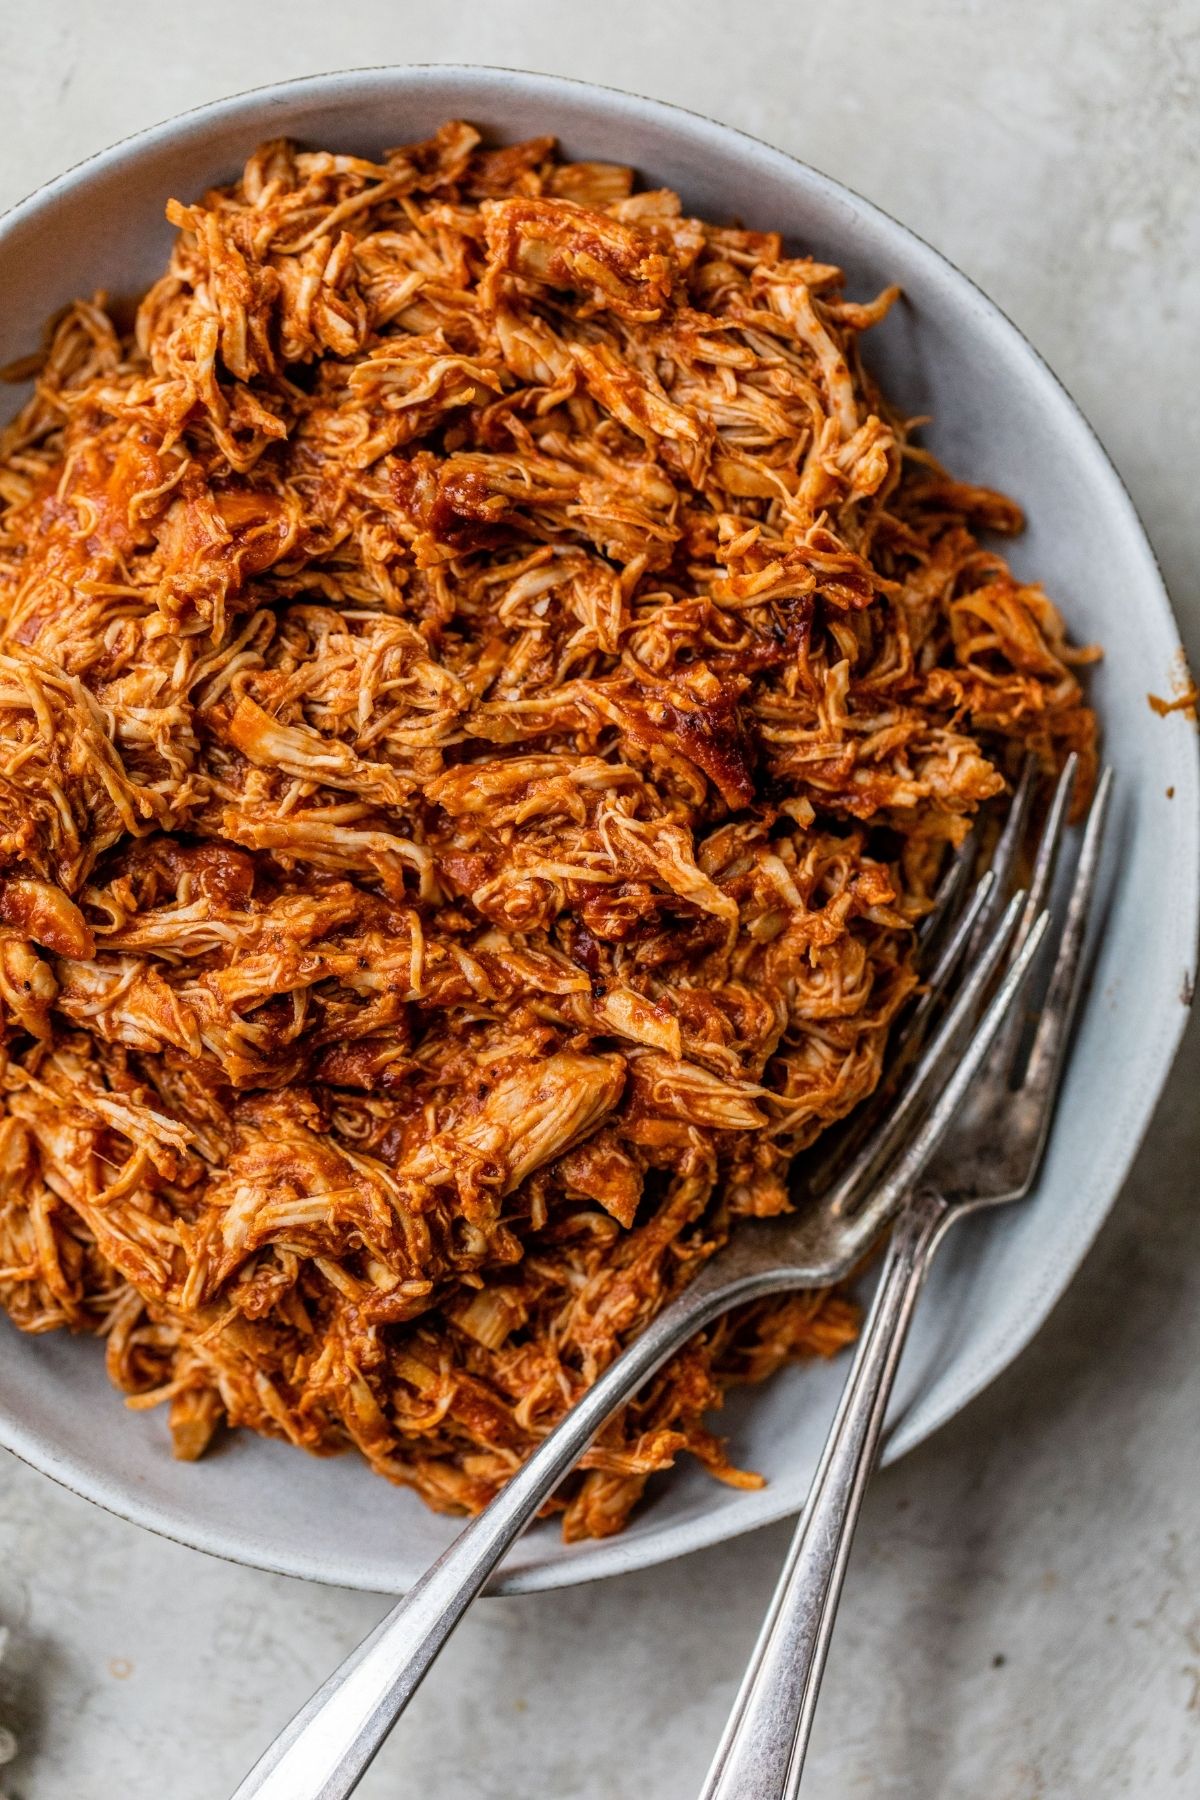 Shredded BBQ chicken on a plate with two forks.